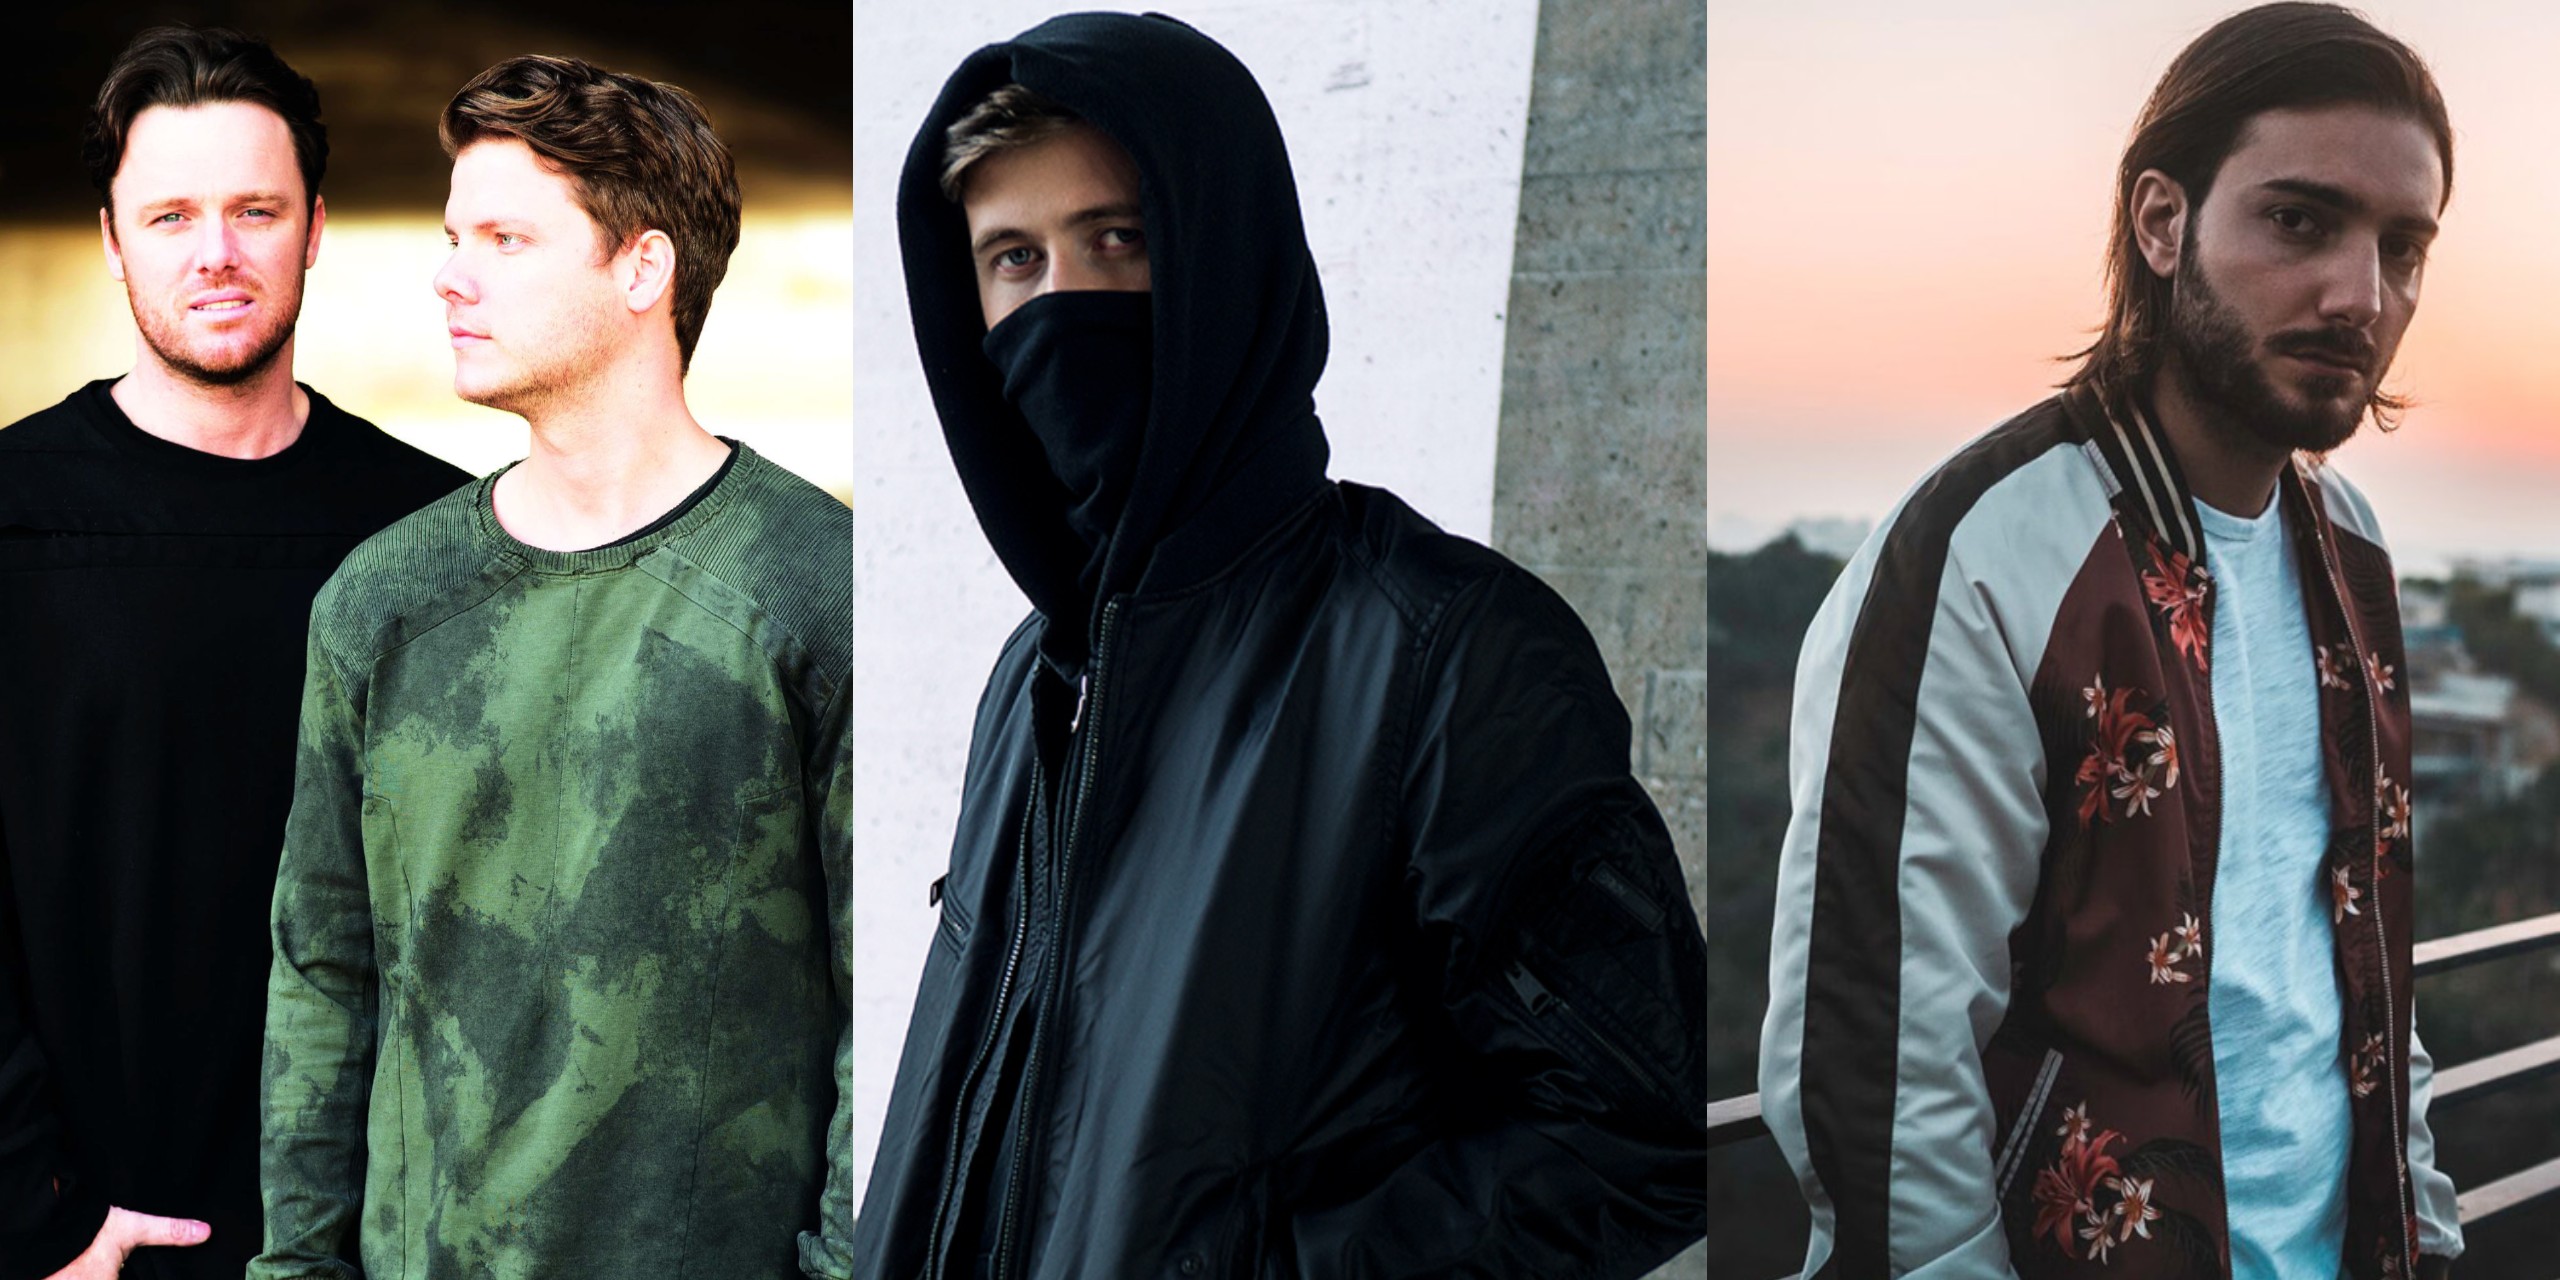 Marquee Singapore reveals August schedule – Alan Walker, Alesso and more to perform 